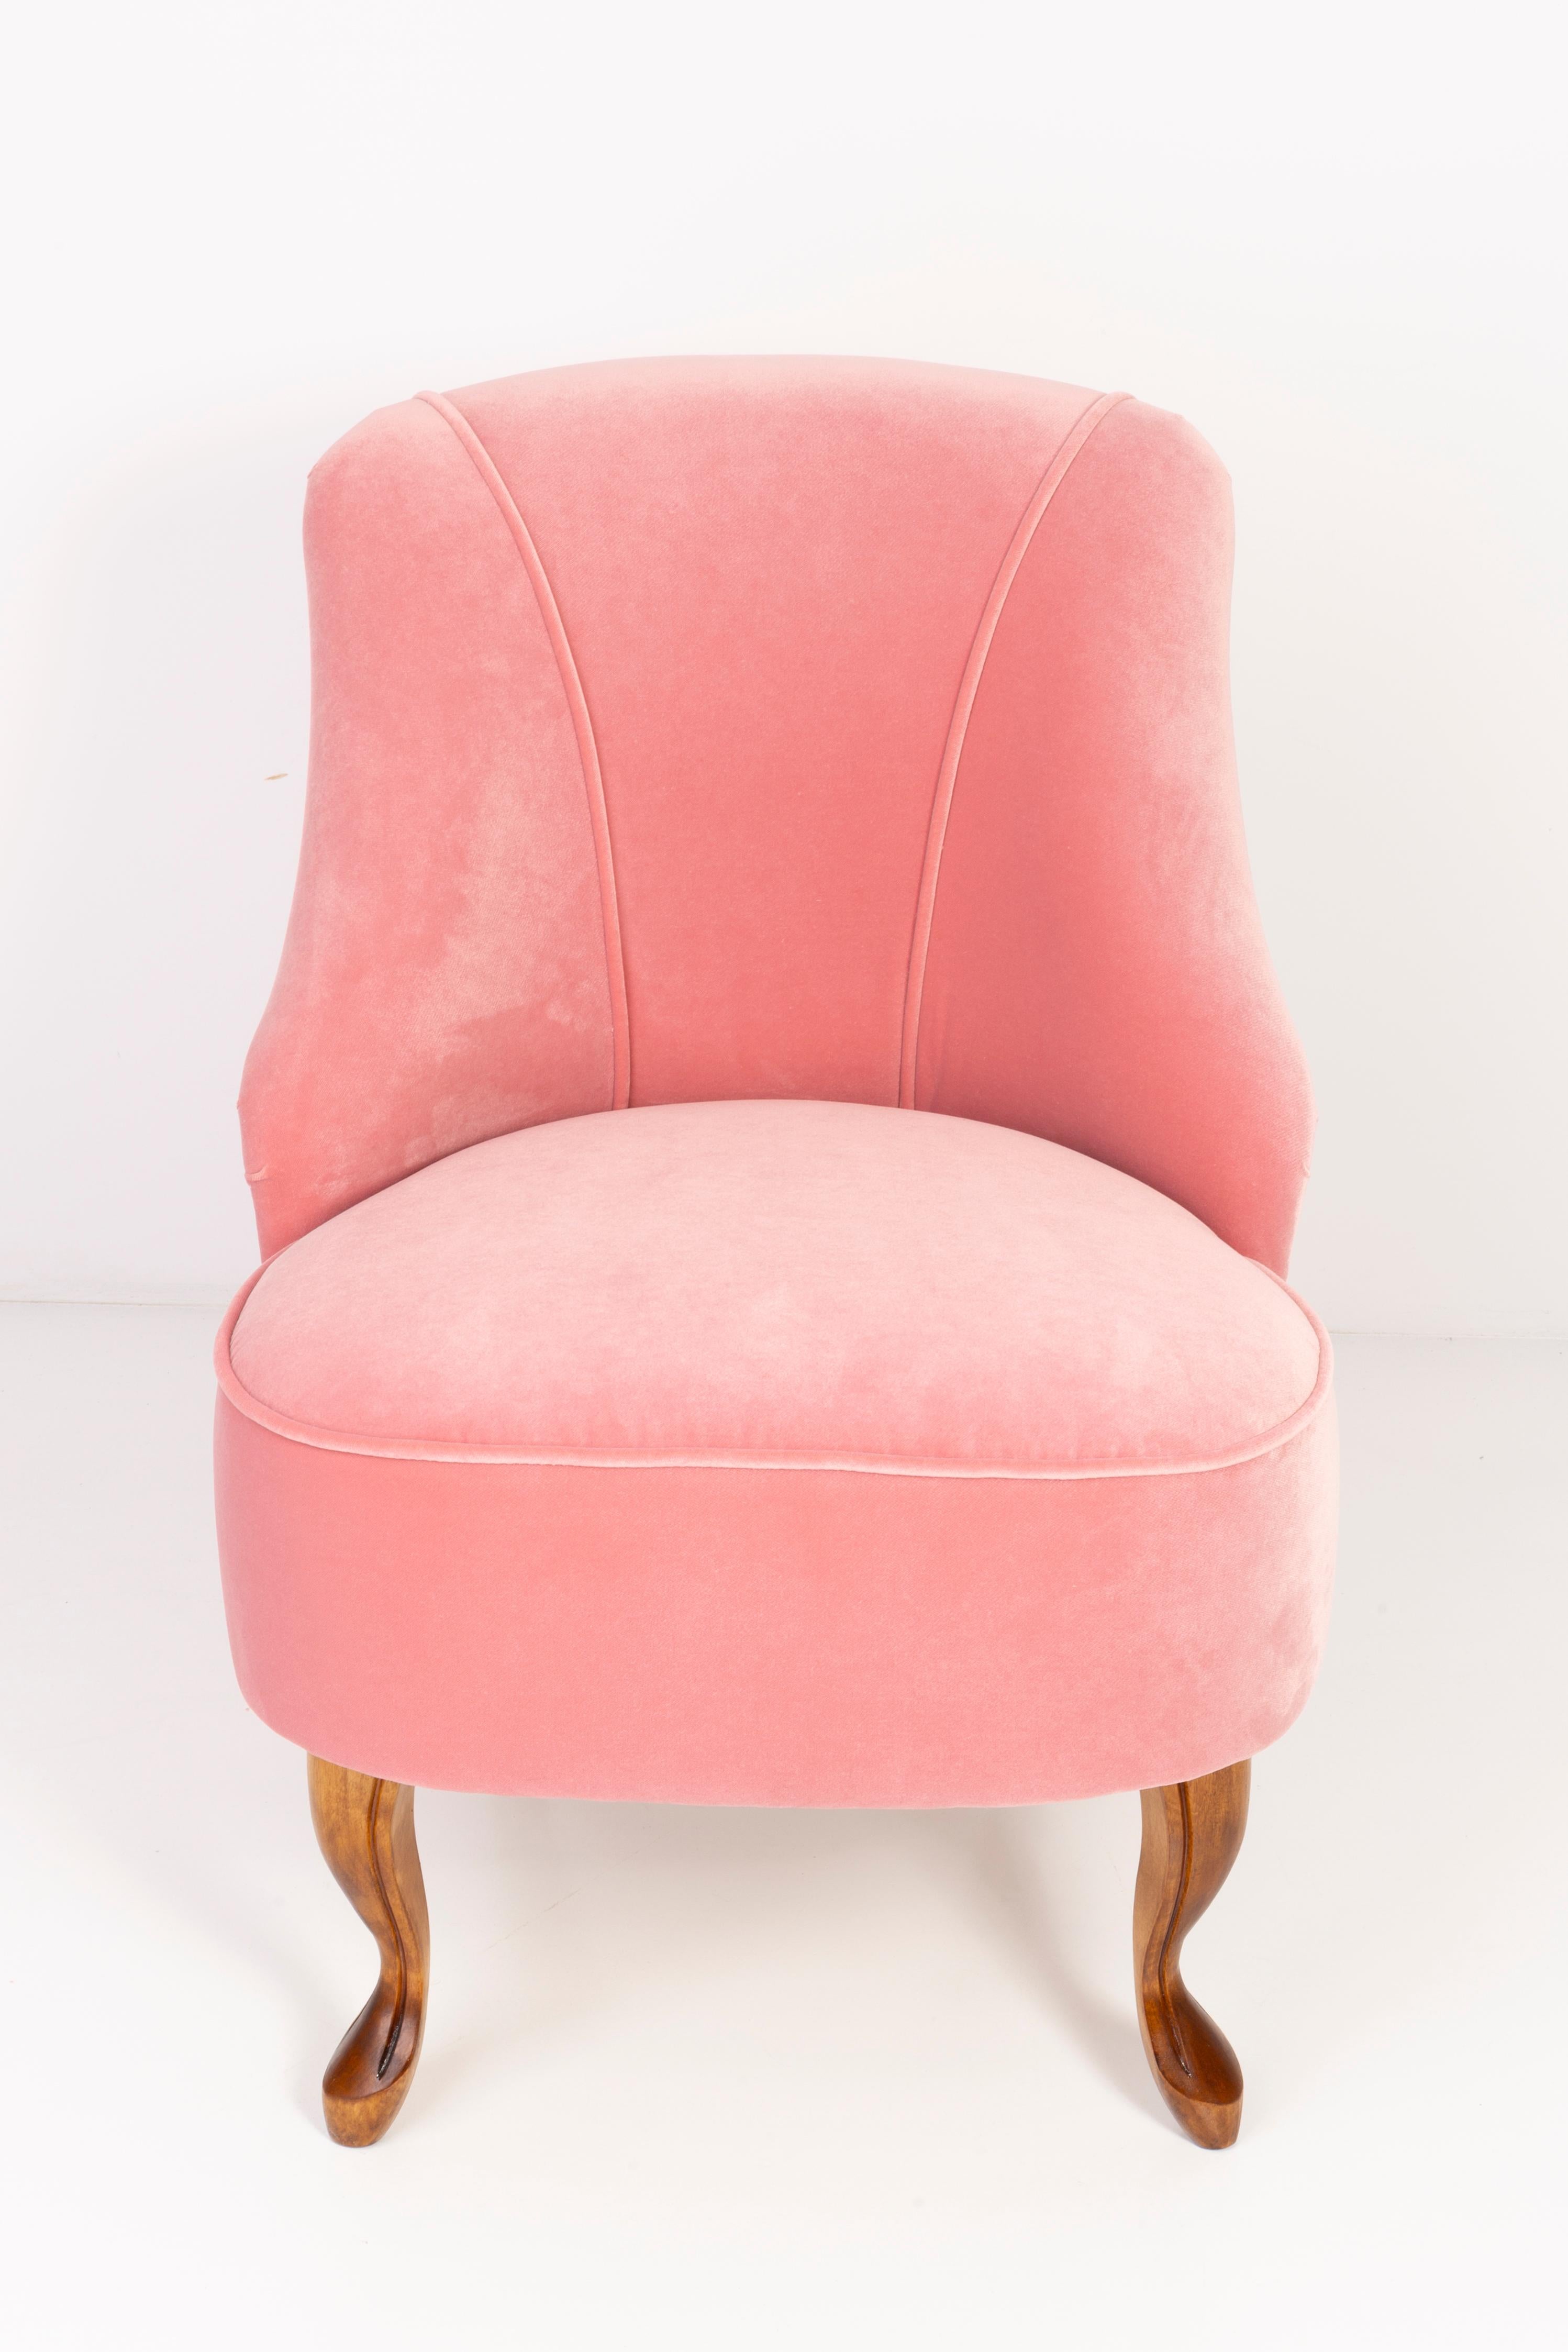 European Set of Four 20th Century Art Deco Baby Pink Armchairs, 1950s For Sale